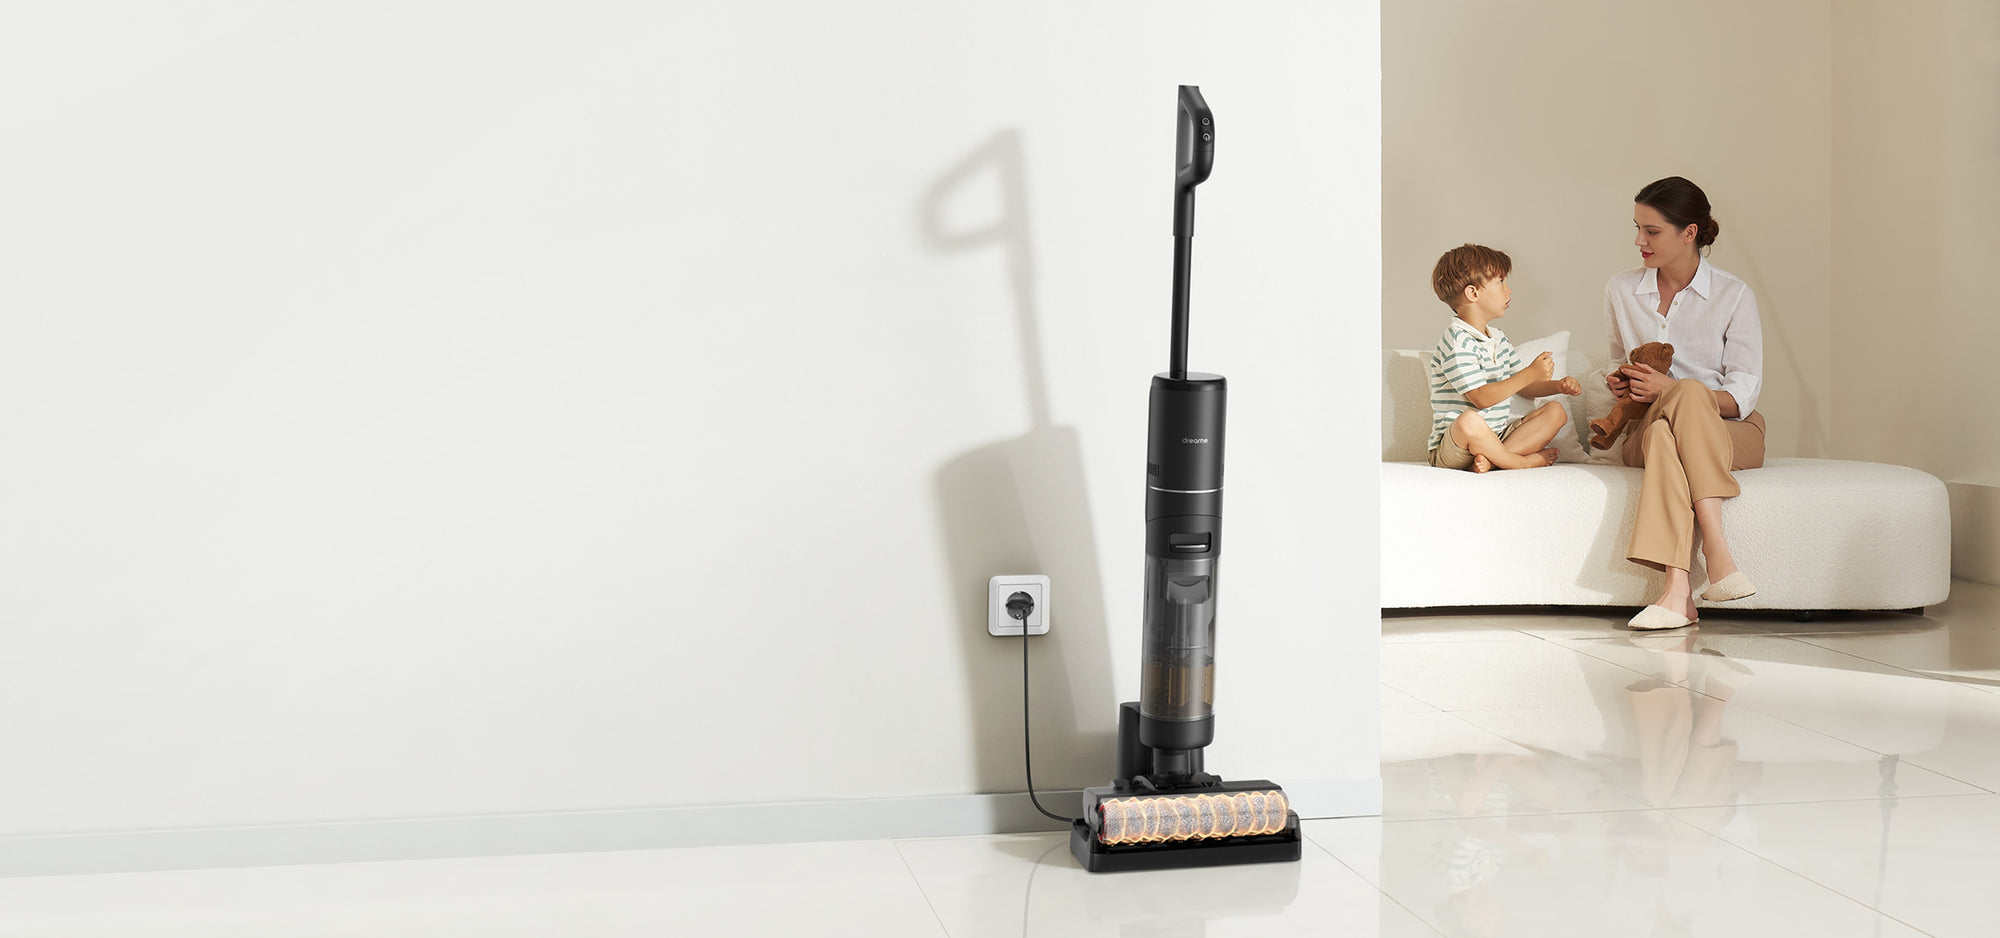 Dreame H12 Pro Wet & Dry Vacuum Cleaner Cordless, TV & Home